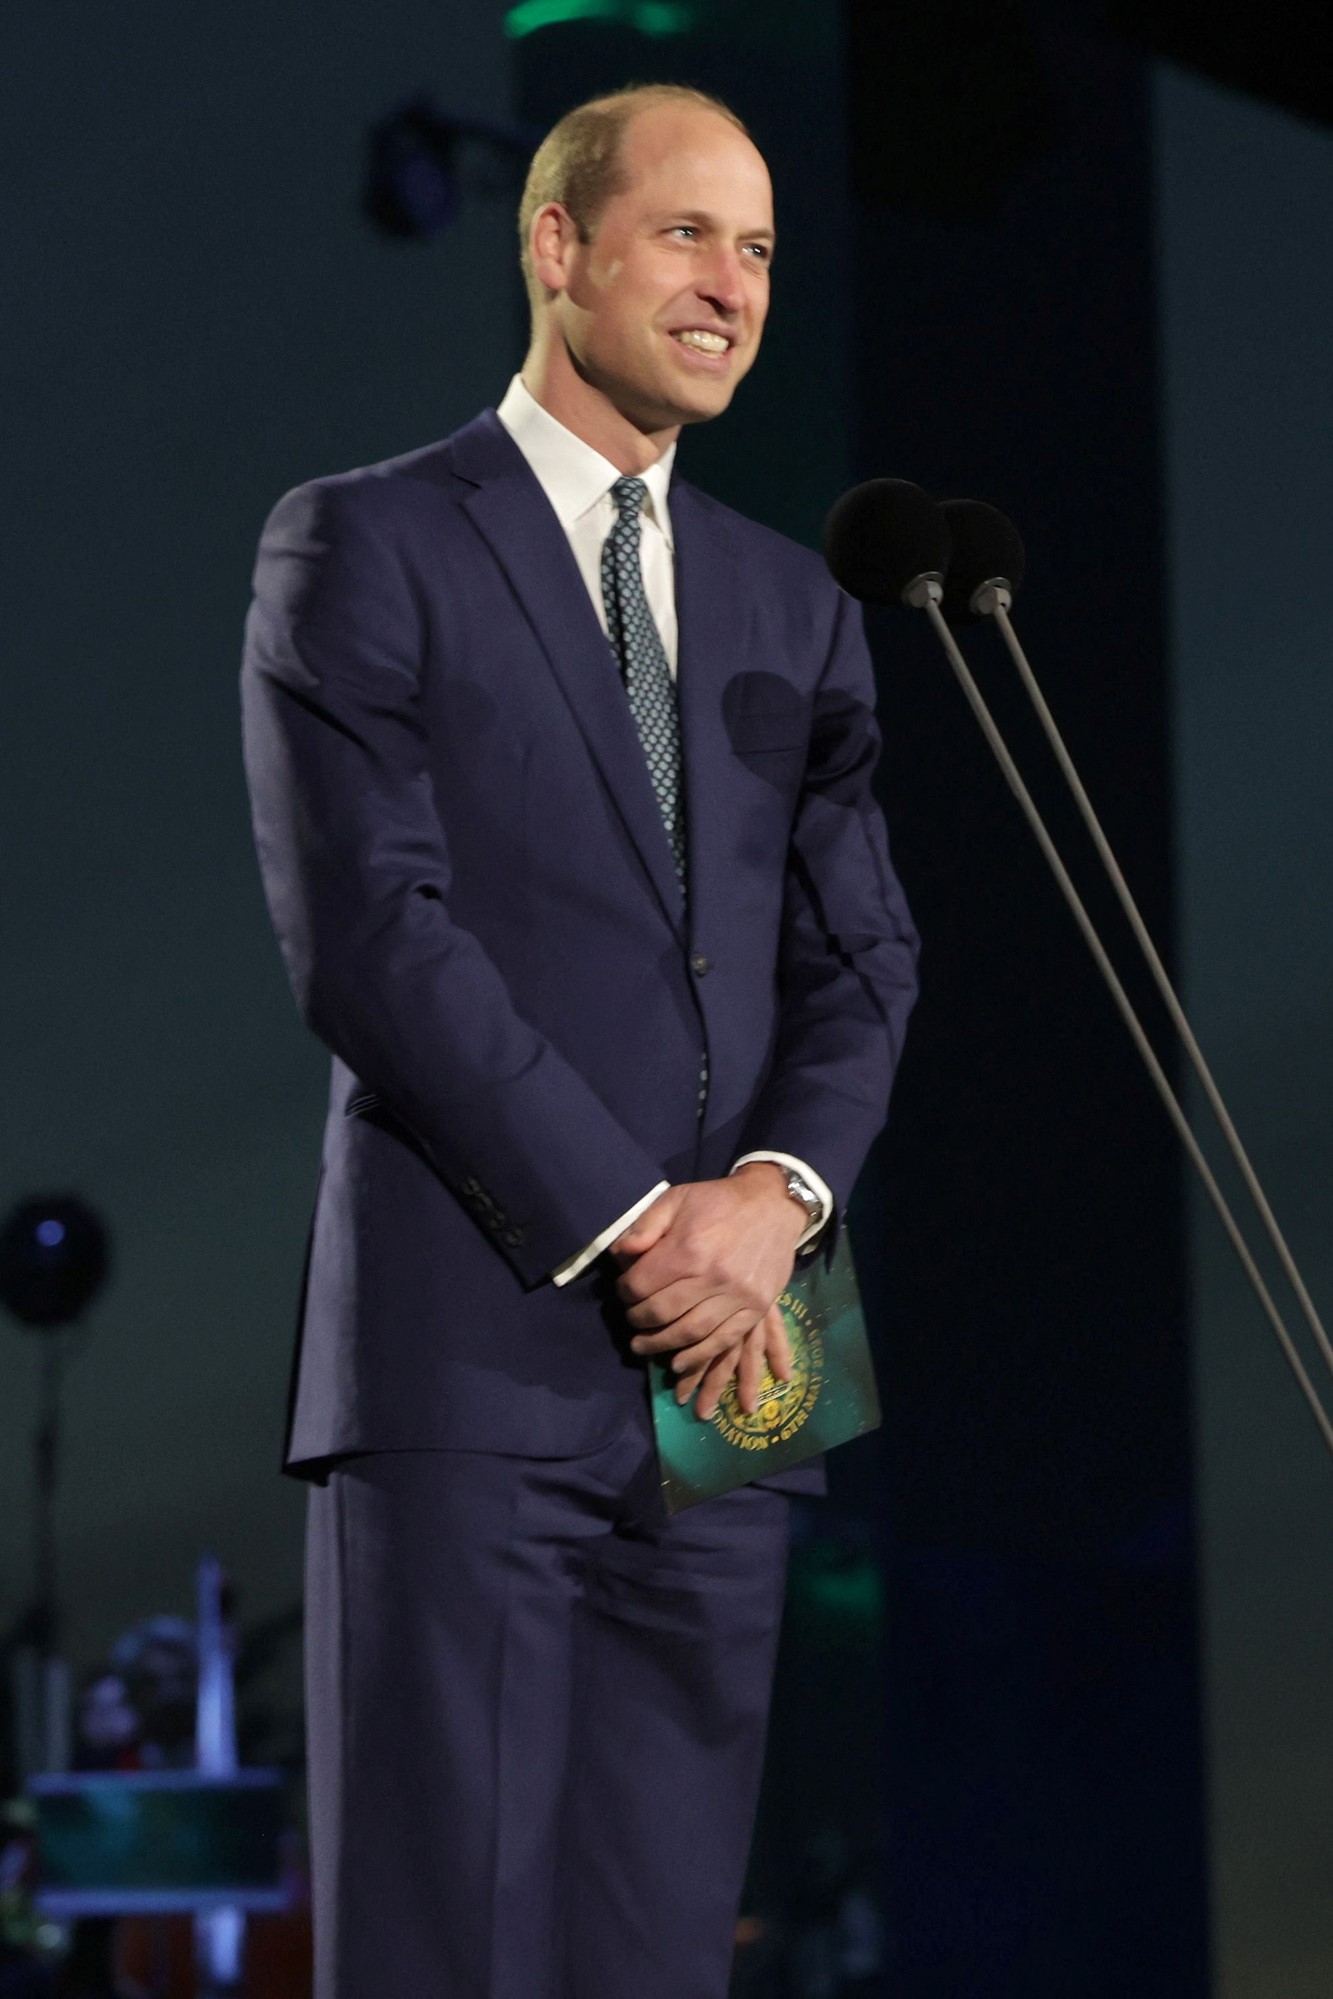 Prince William stands on stage